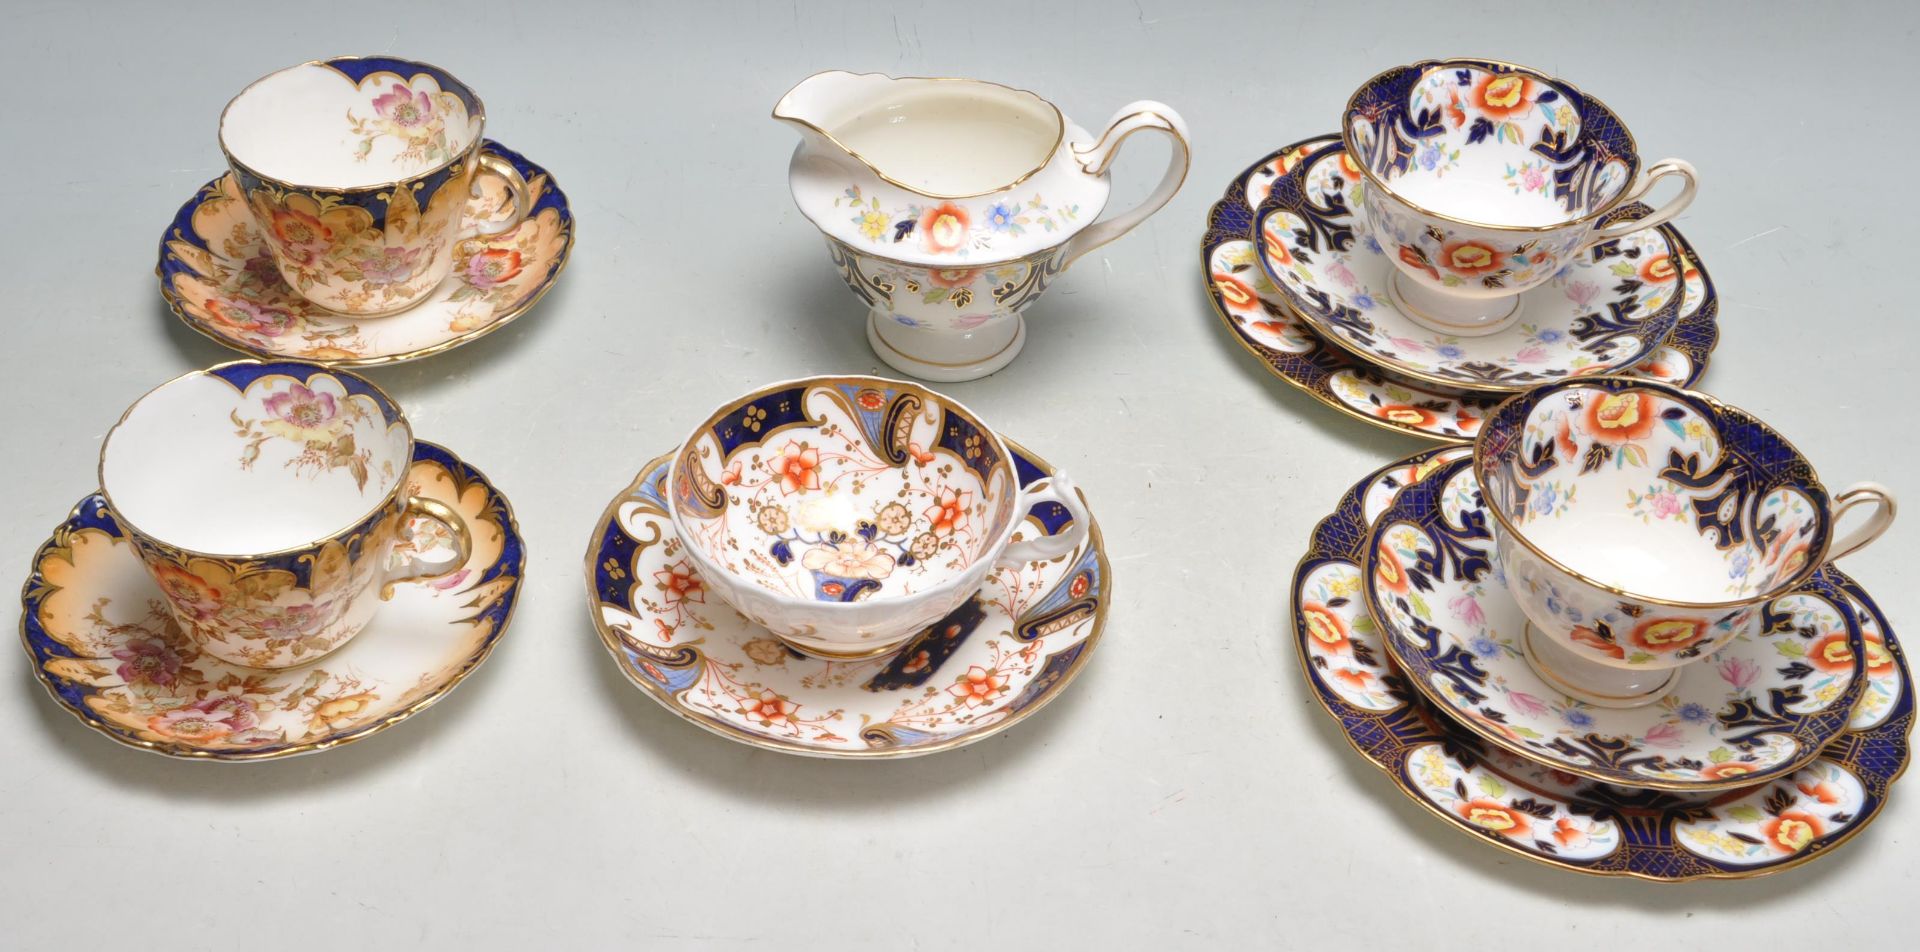 COLLECTION OF EARLY 20TH CENTURY IMARI PATTERN CABINET CERAMIC WARE TO INCLUDE CUPS AND SAUCERS